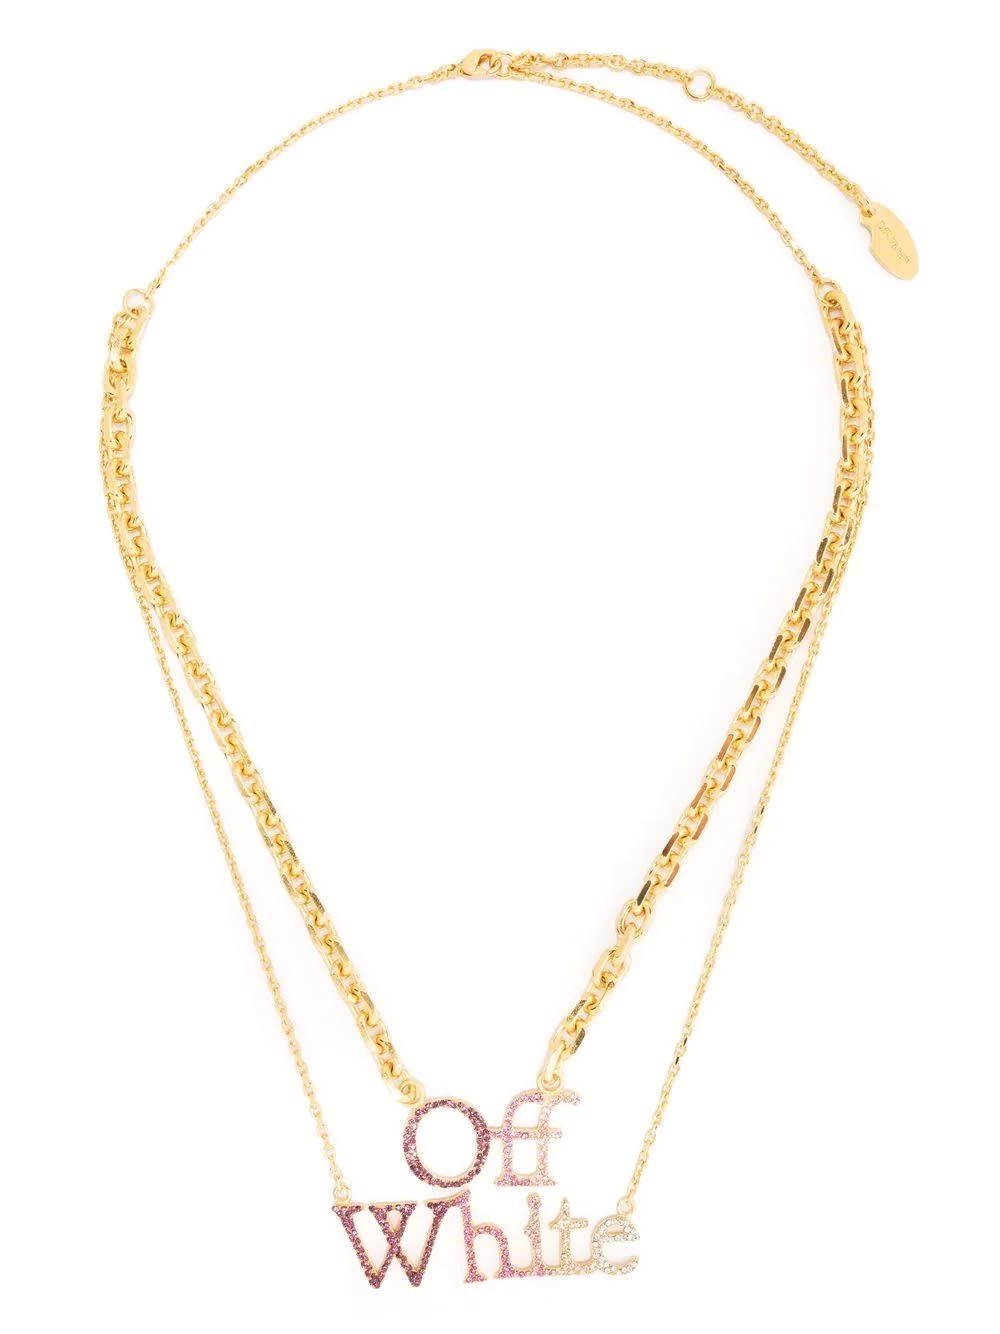 OFF-WHITE PAVÉ NECKLACE WITH LOGO